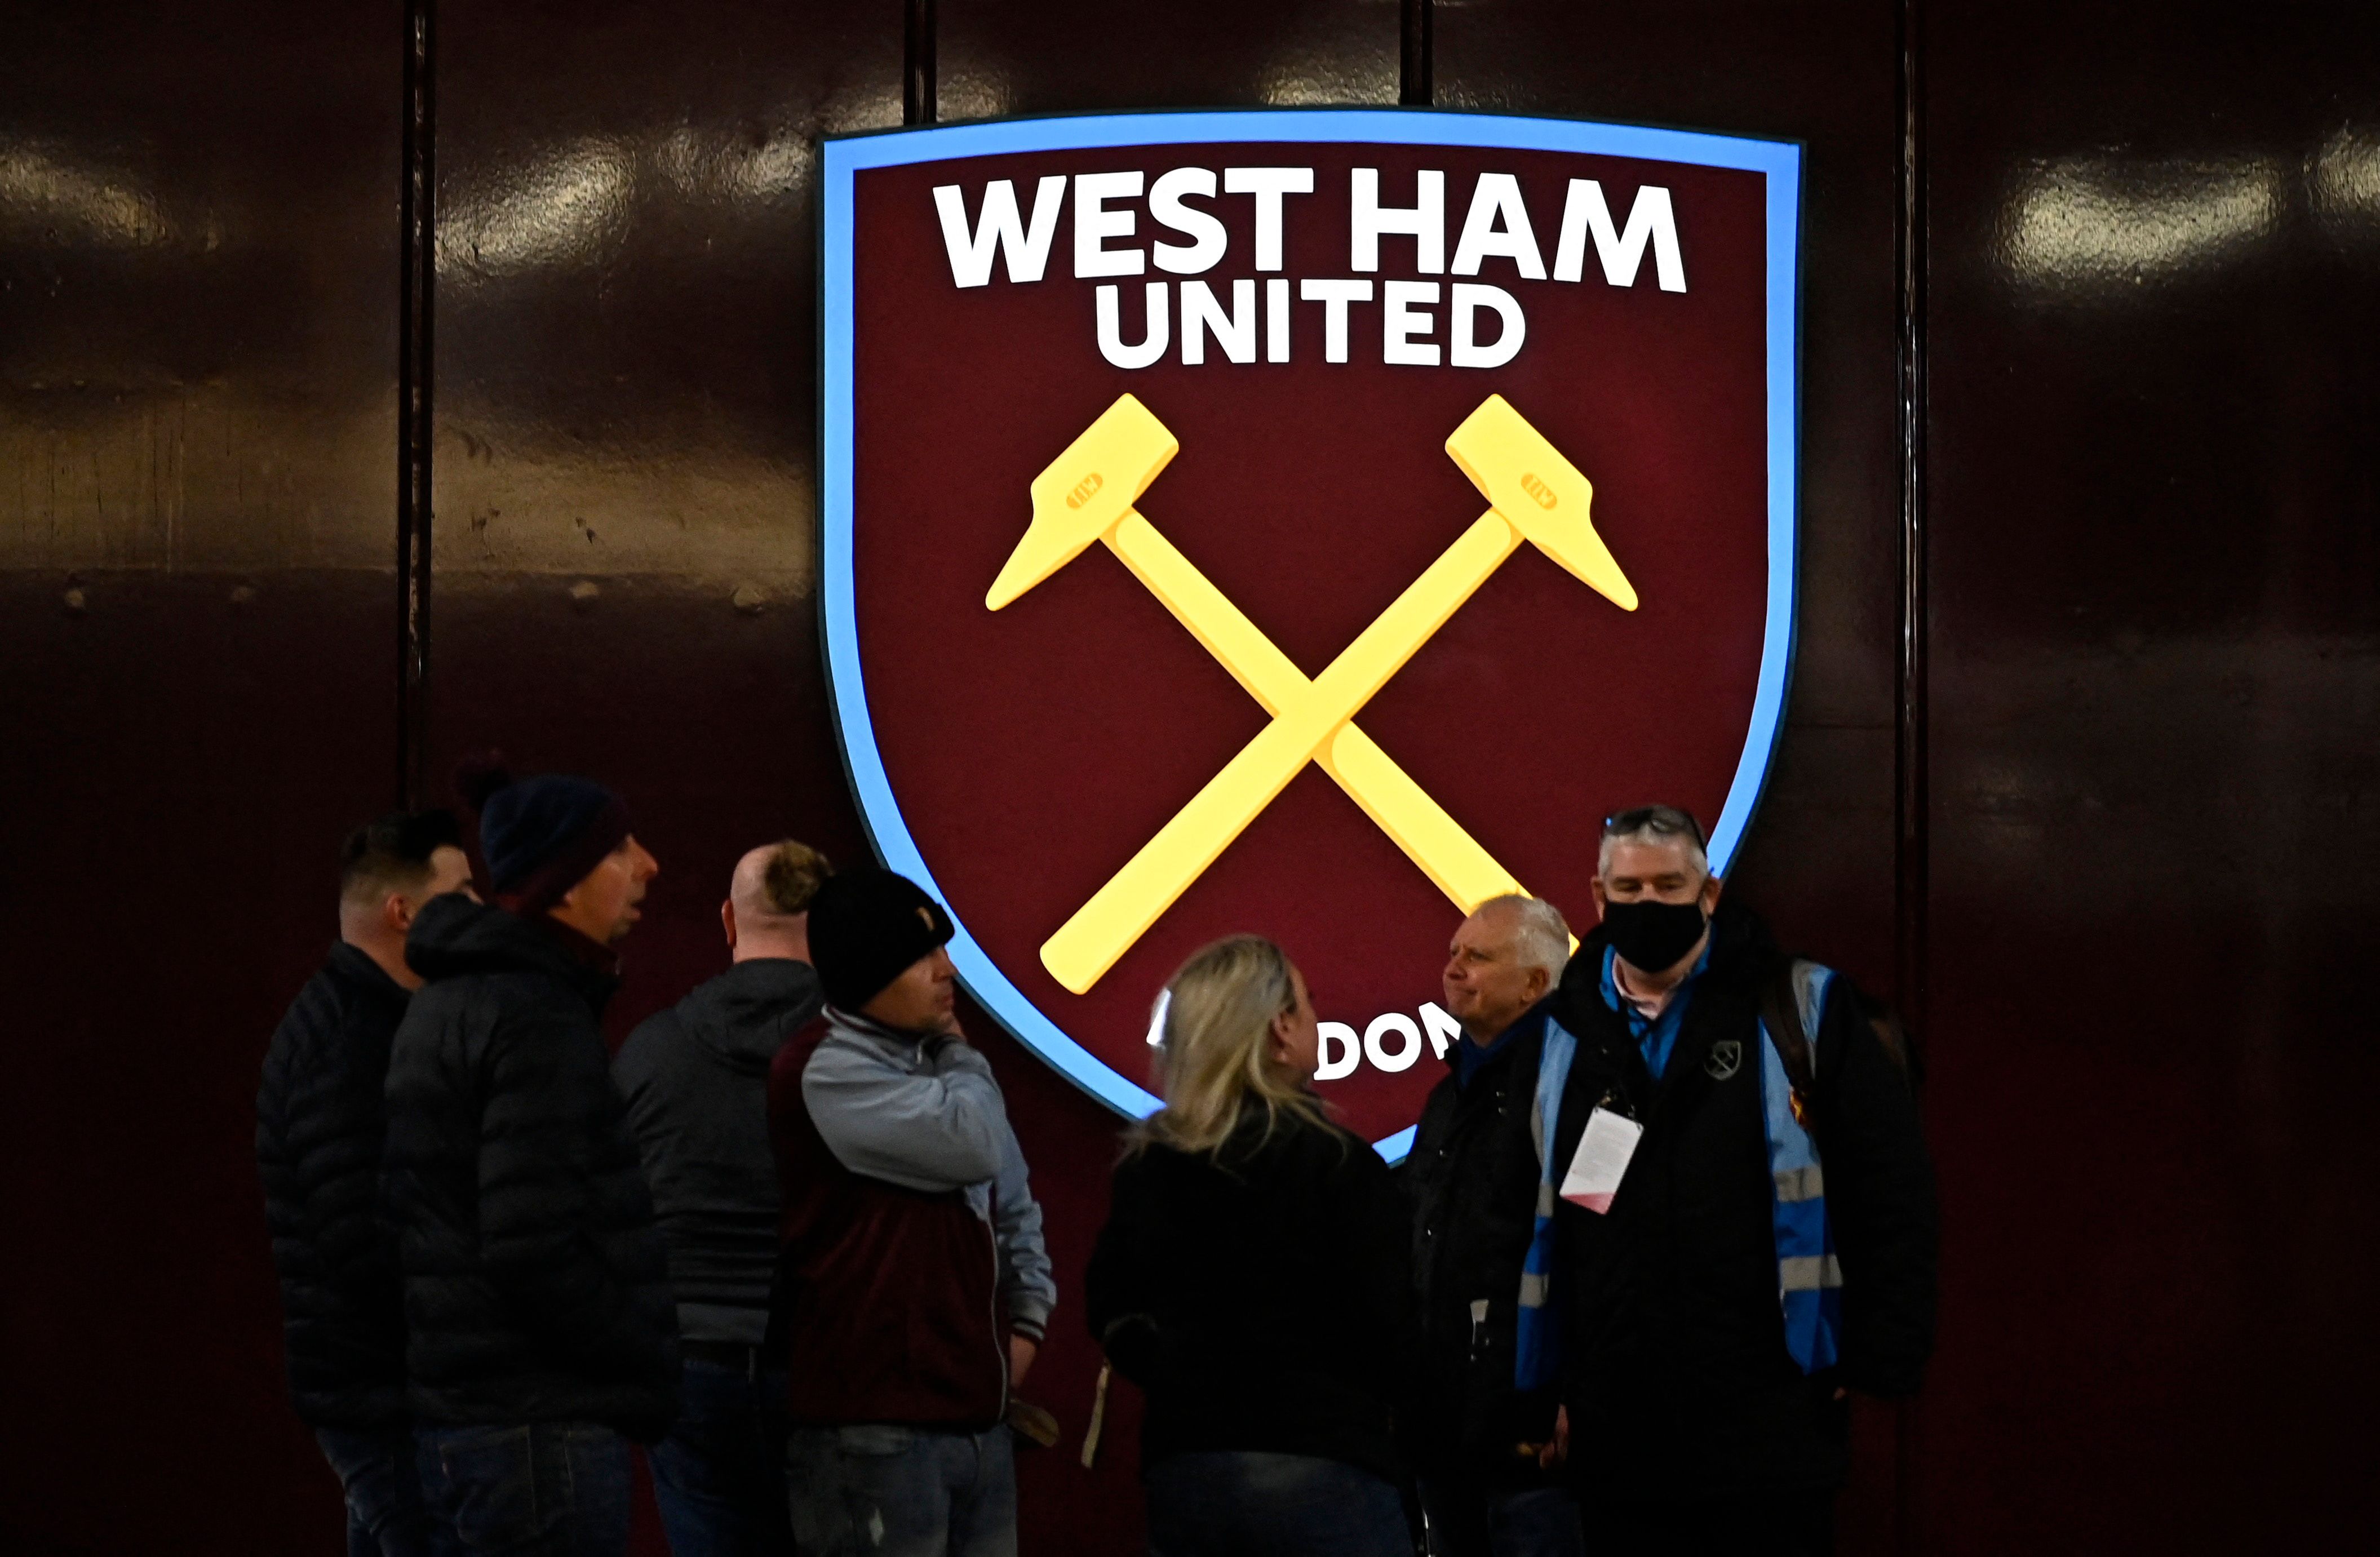 West Ham's badge on a match day.